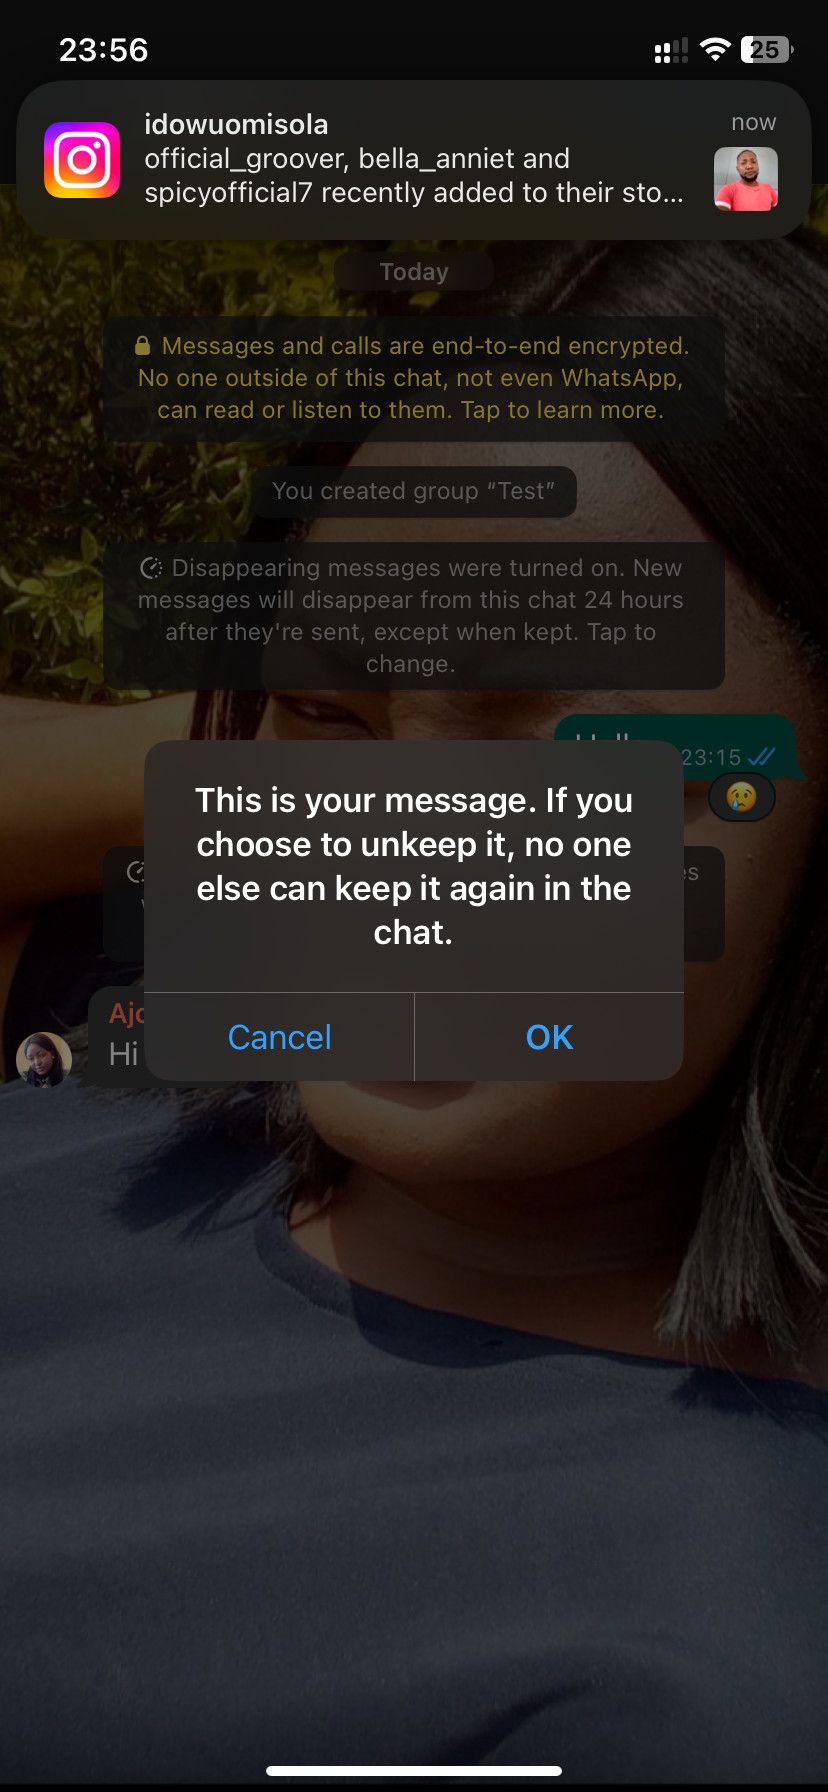 WhatsApp warning for unkeeping a message